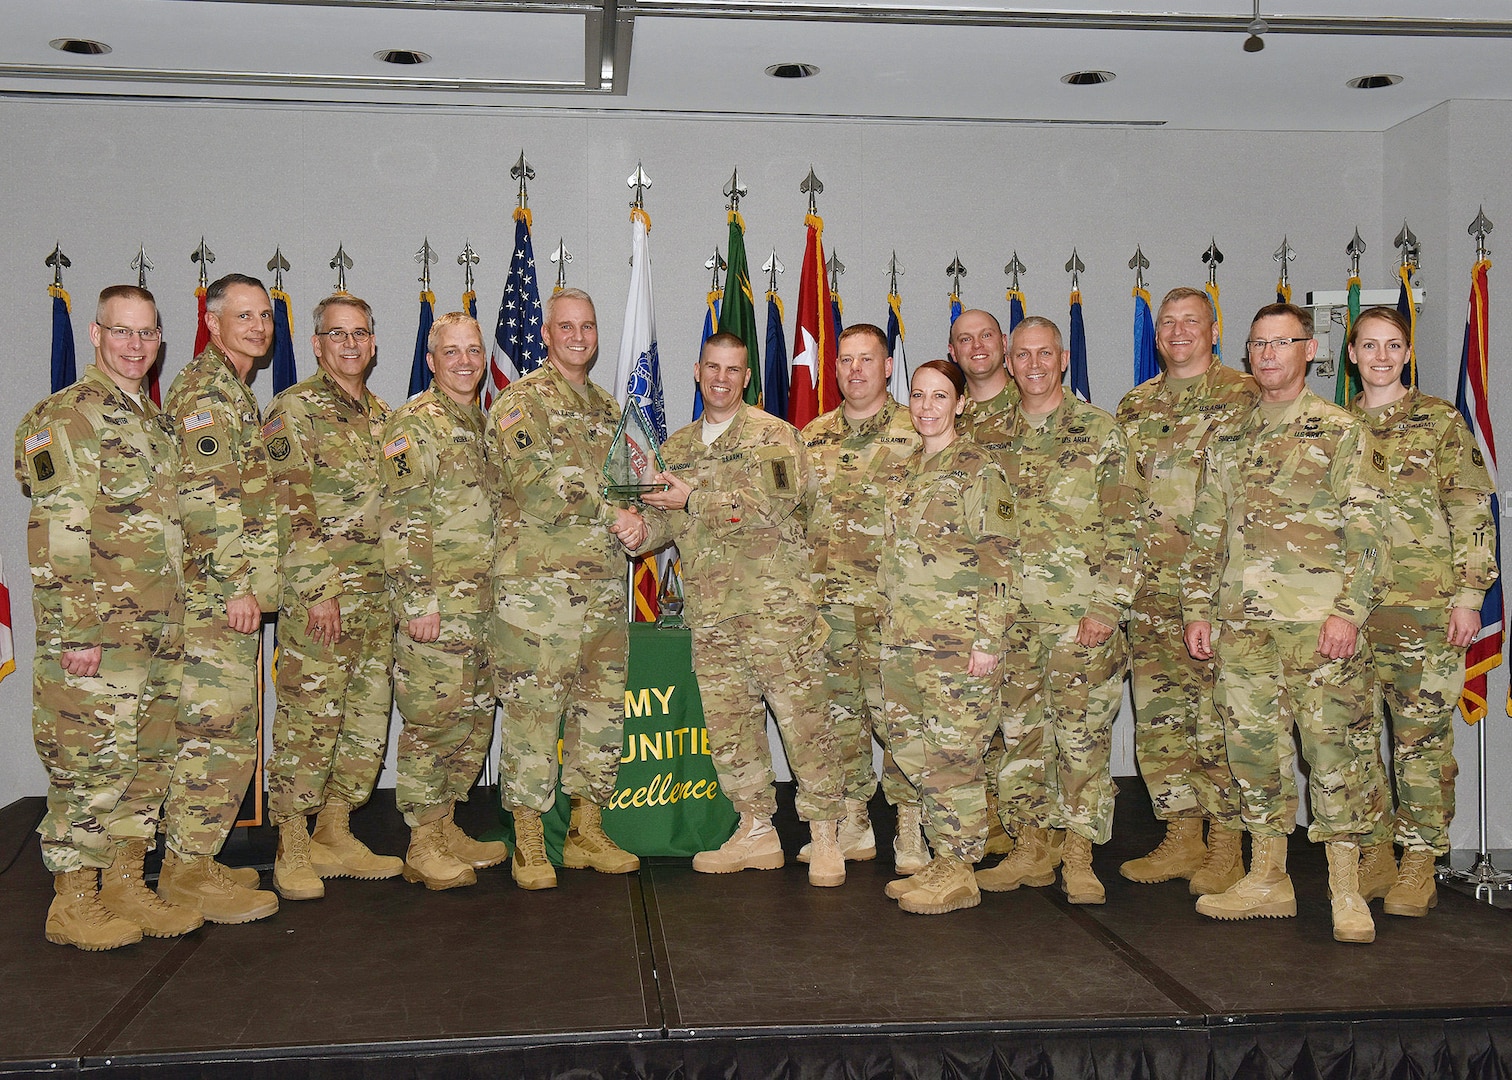 Army Maj. Gen. Richard Gallant, special assistant to the director of the Army National Guard, presents Wisconsin National Guard representatives with the Overall Winner of the Army National Guard Communities of Excellence award at a ceremony held at the Army National Guard Readiness Center in Arlington, Va., May 23, 2016.